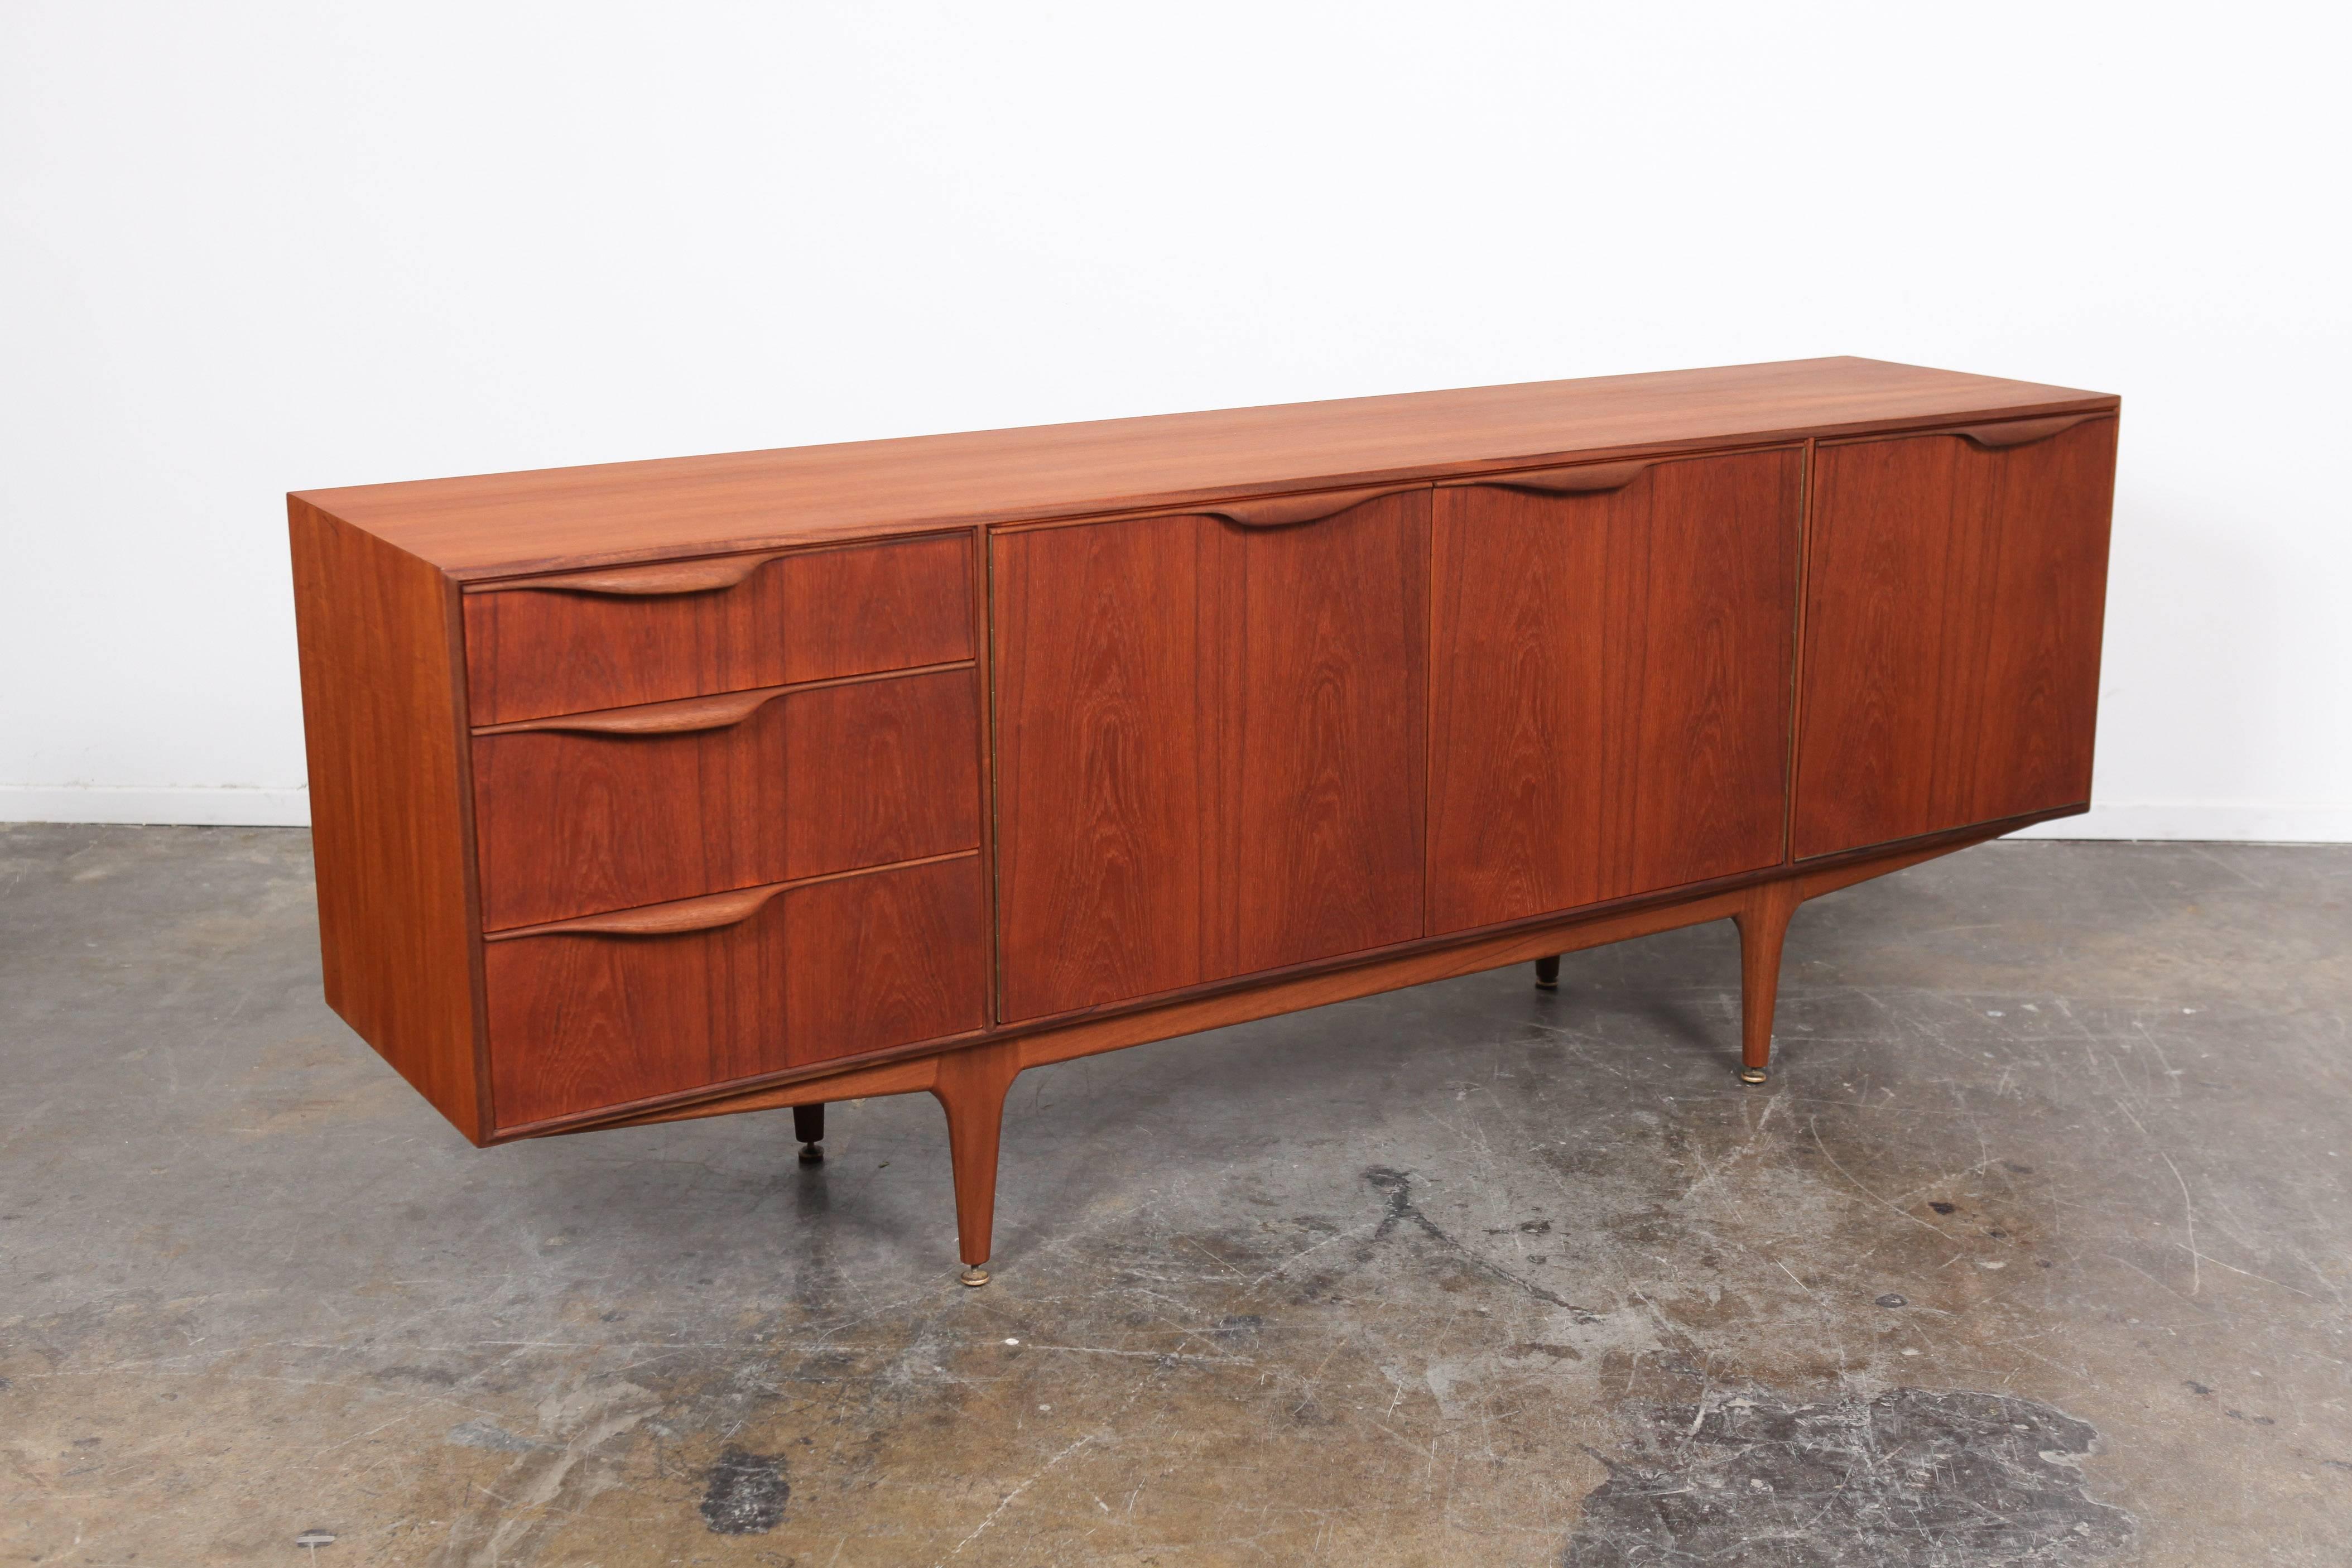 Teak Mid-Century Modern three-door, three-drawer low sideboard by A.H. McIntosh of Scotland, part of the Dunvegan series.